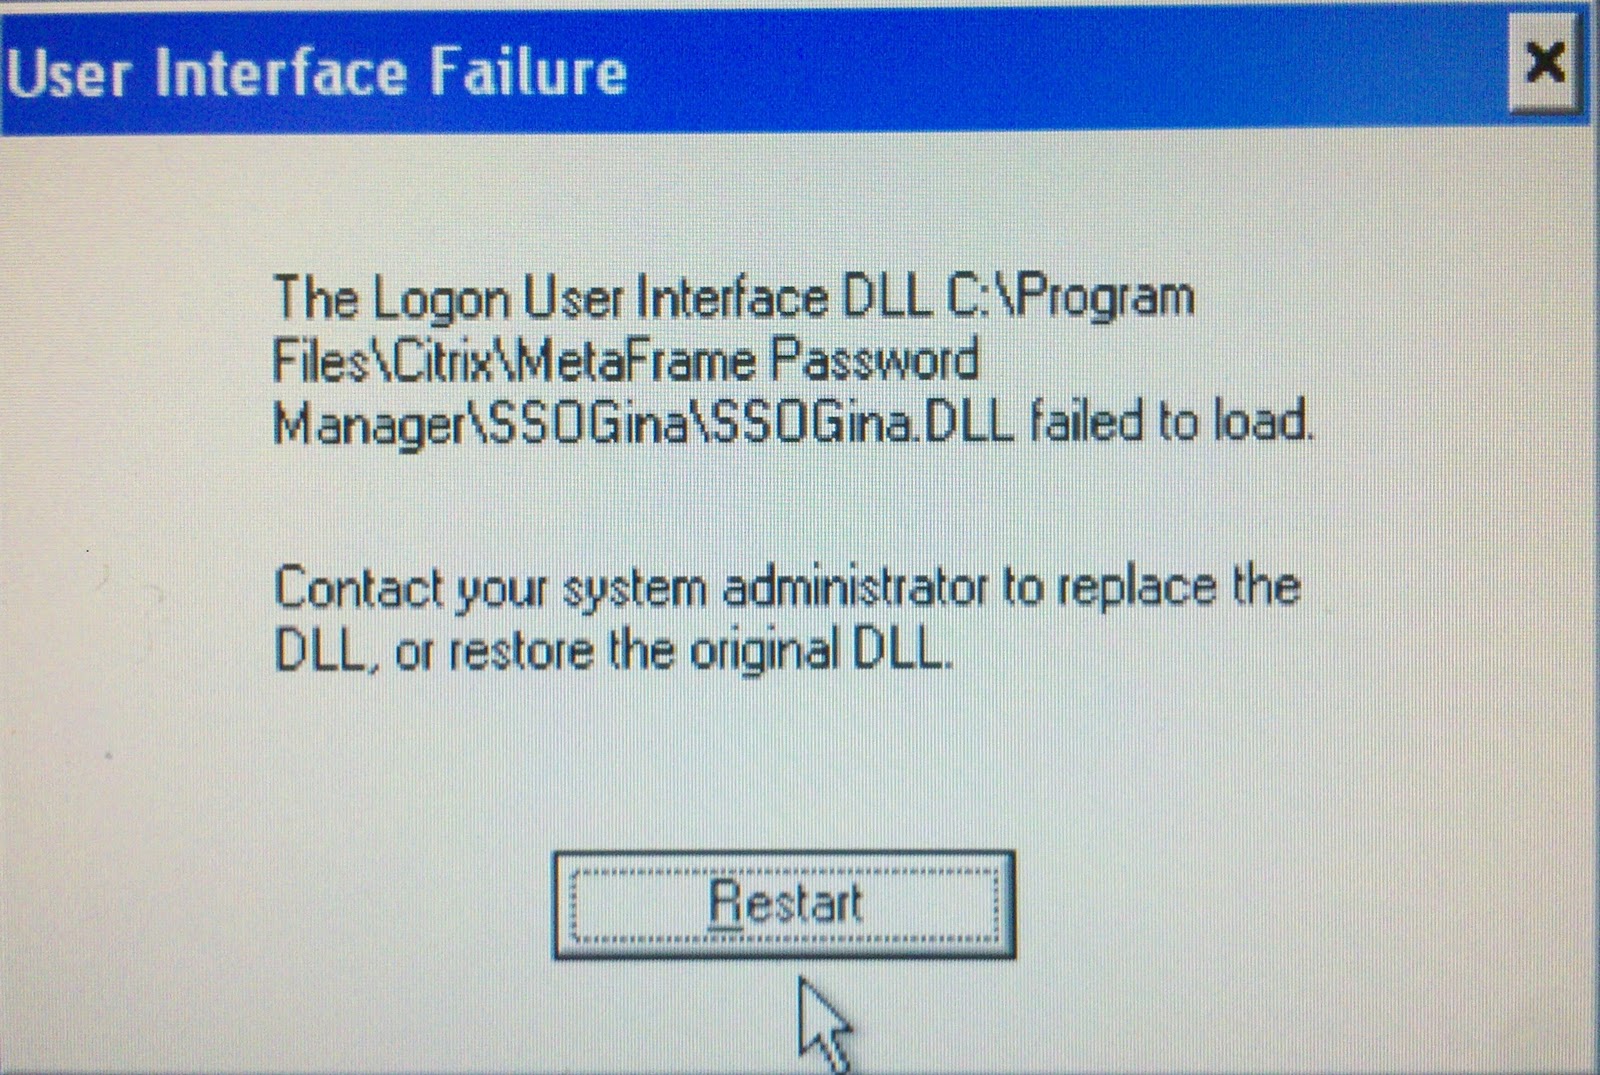 Load lib fail. Failed to load. Failed to load dll from the list.